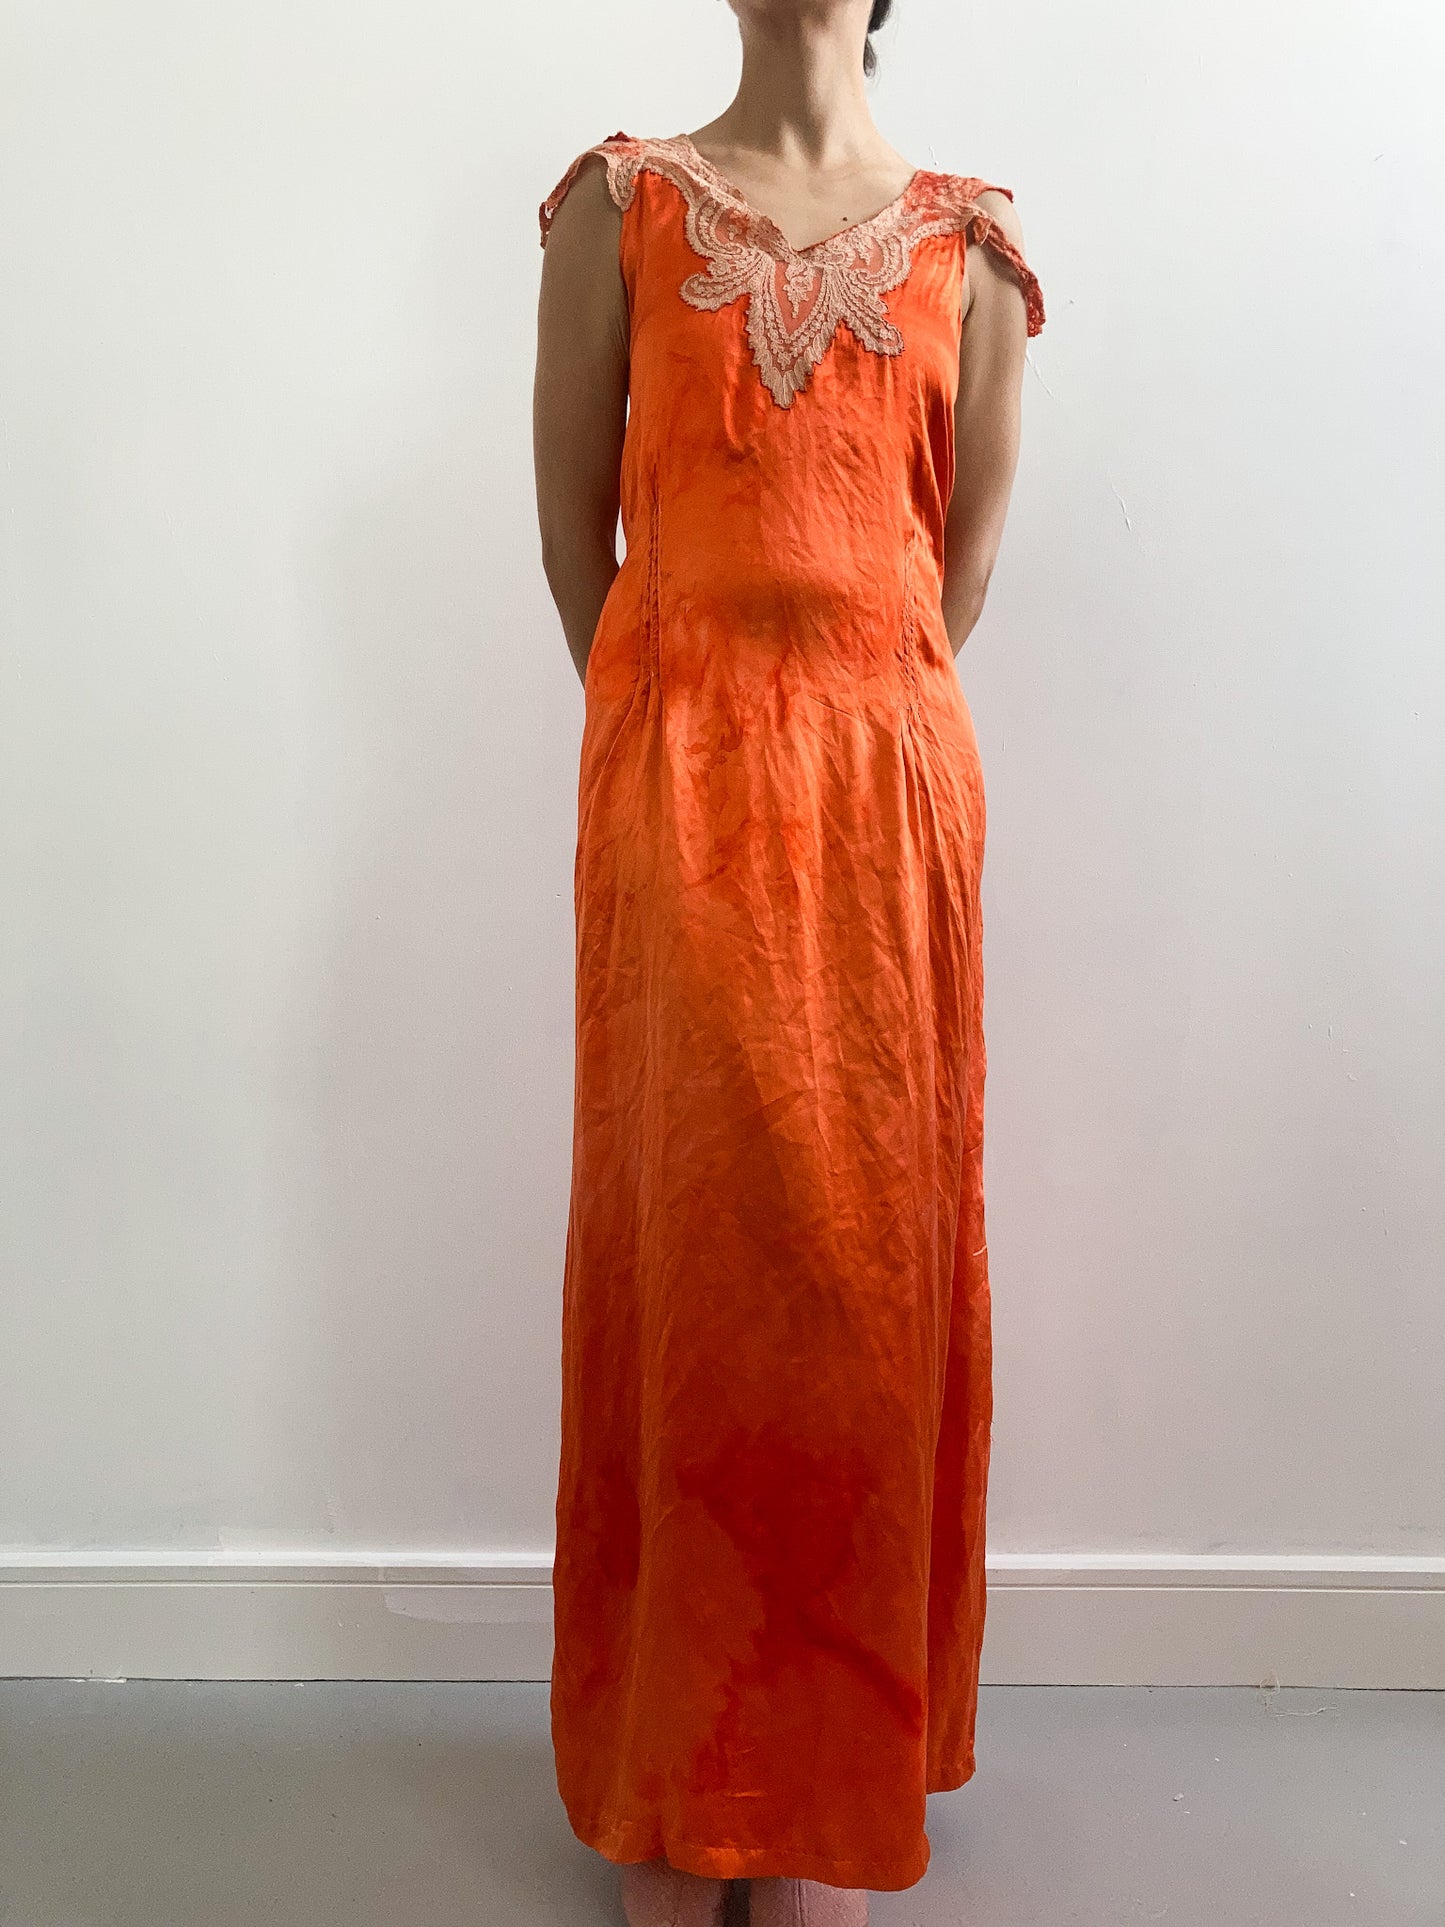 1930s Hand Dyed Silk Satin Slip with Lace and Cap Sleeves